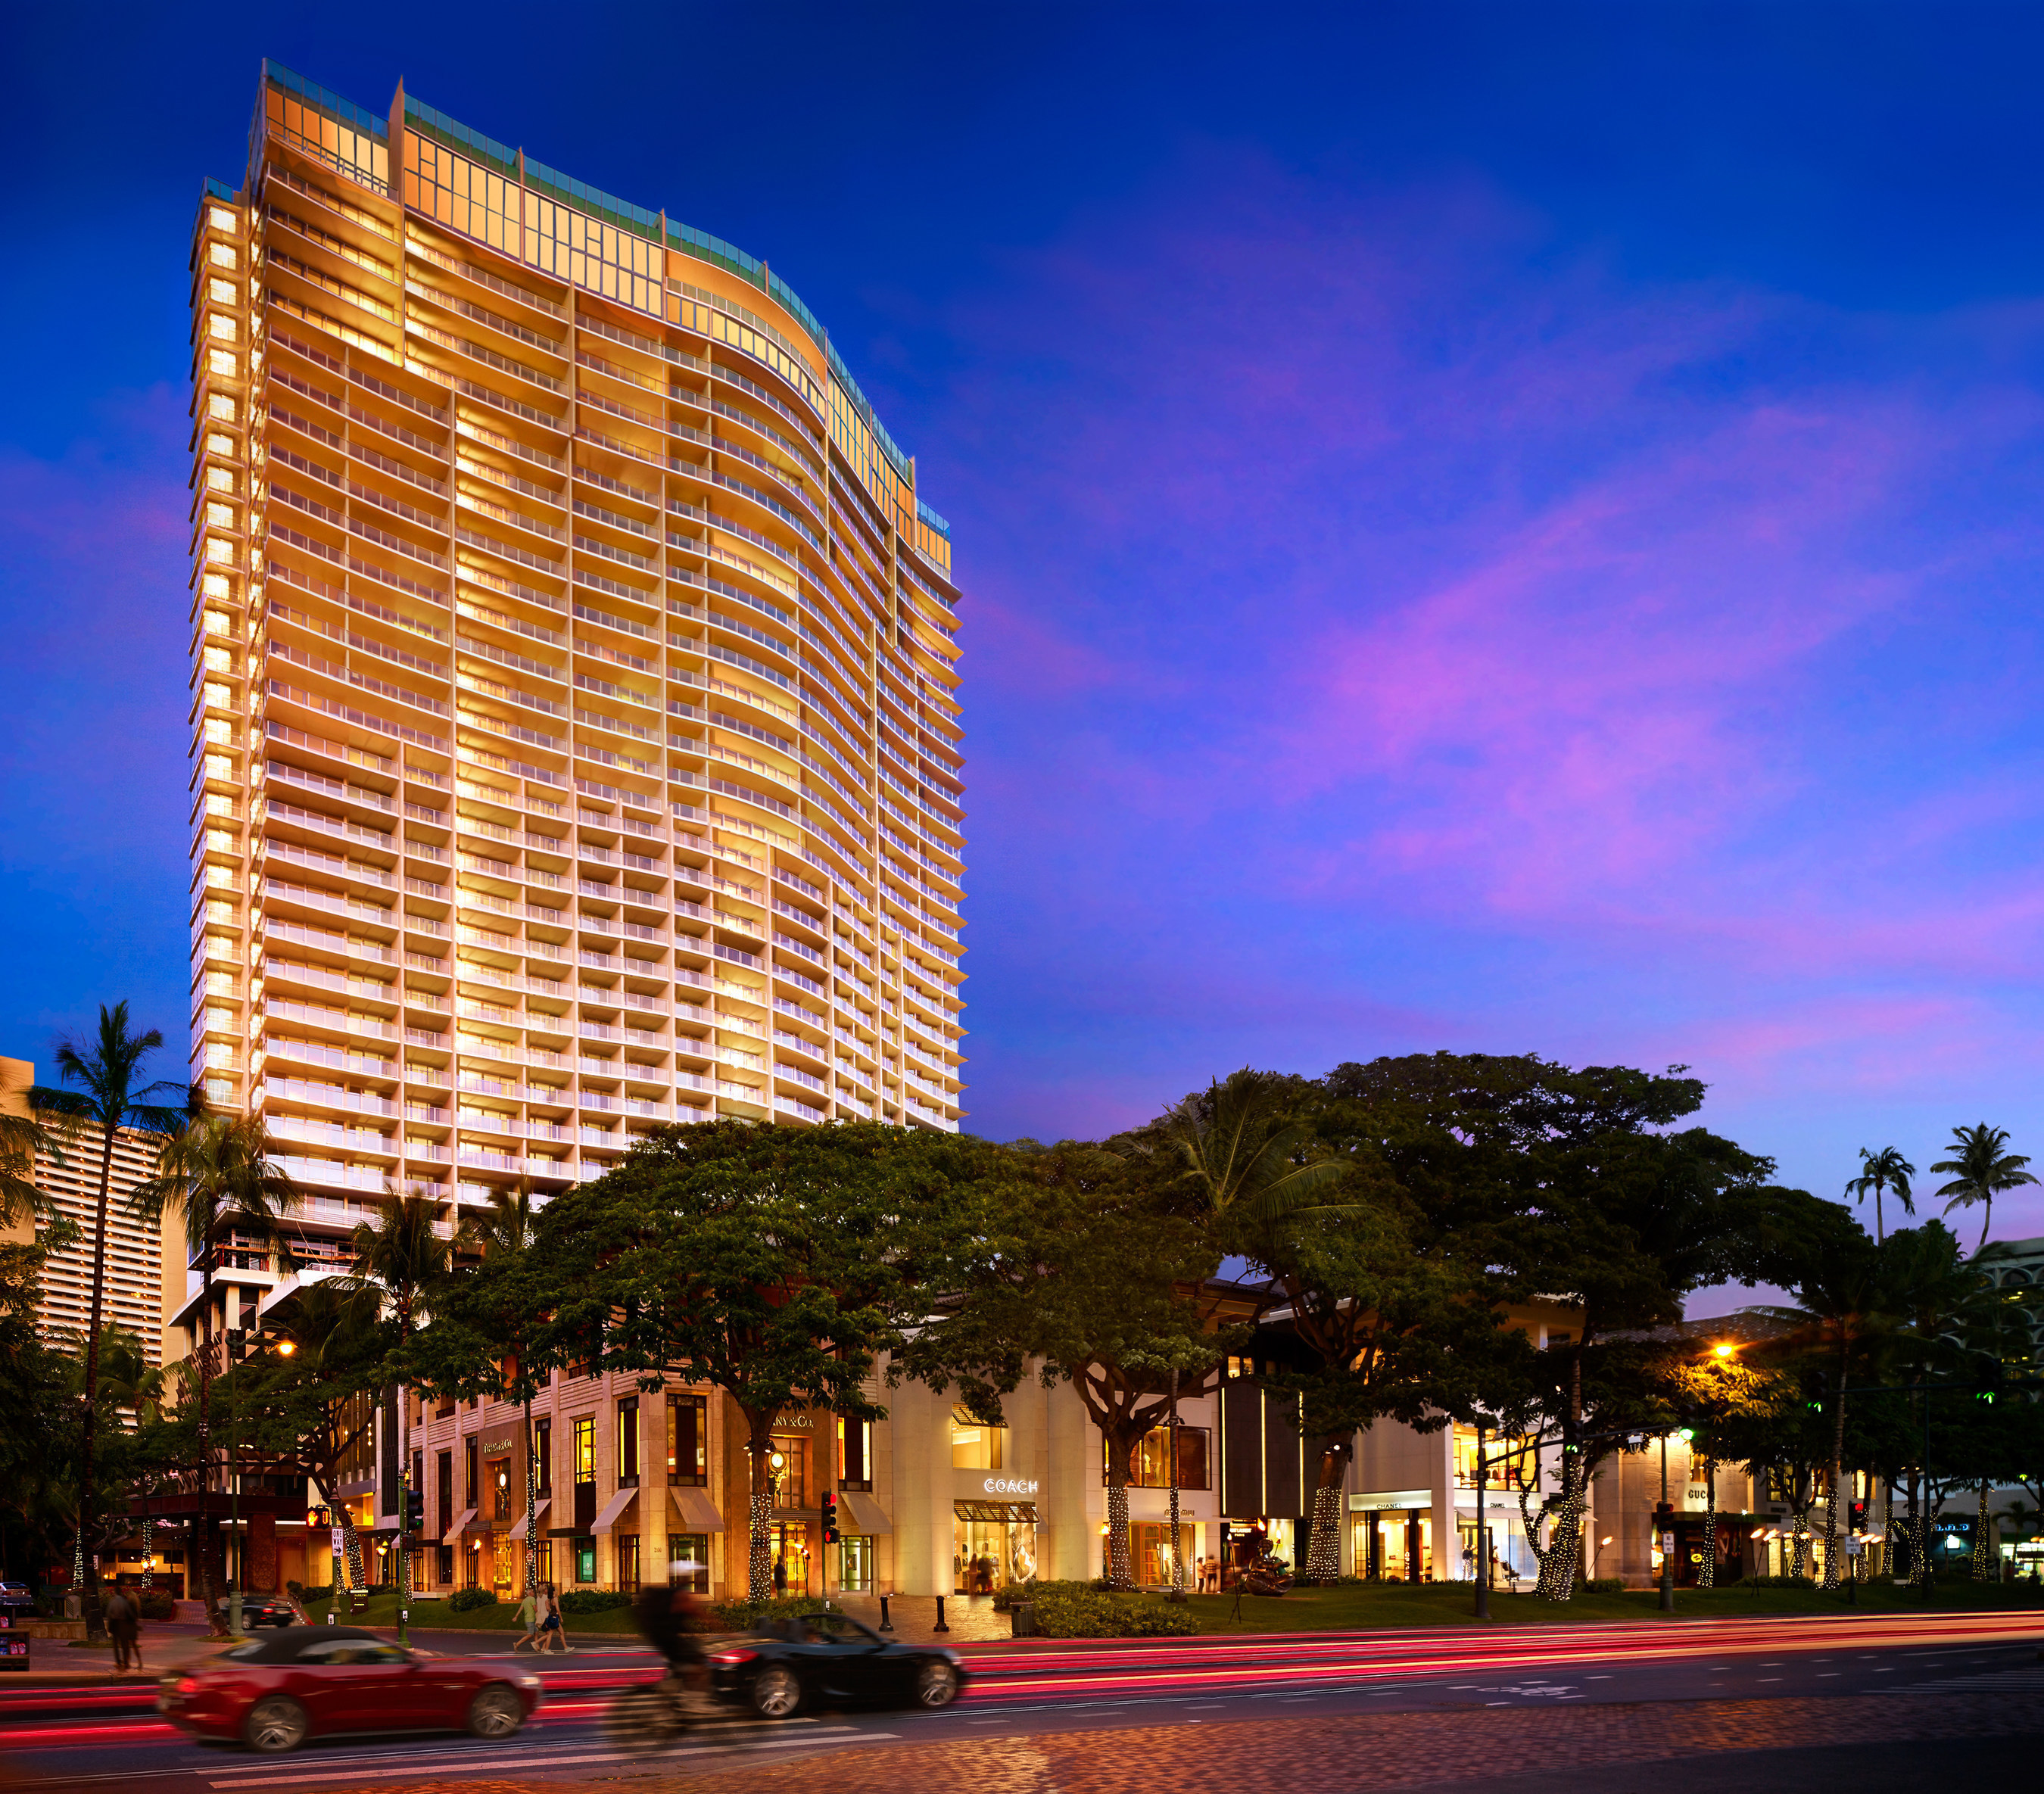 The Ritz-Carlton Residences, Waikiki Beach is now accepting reservations, offering guests a new horizon of luxury in world-renowned Waikiki.